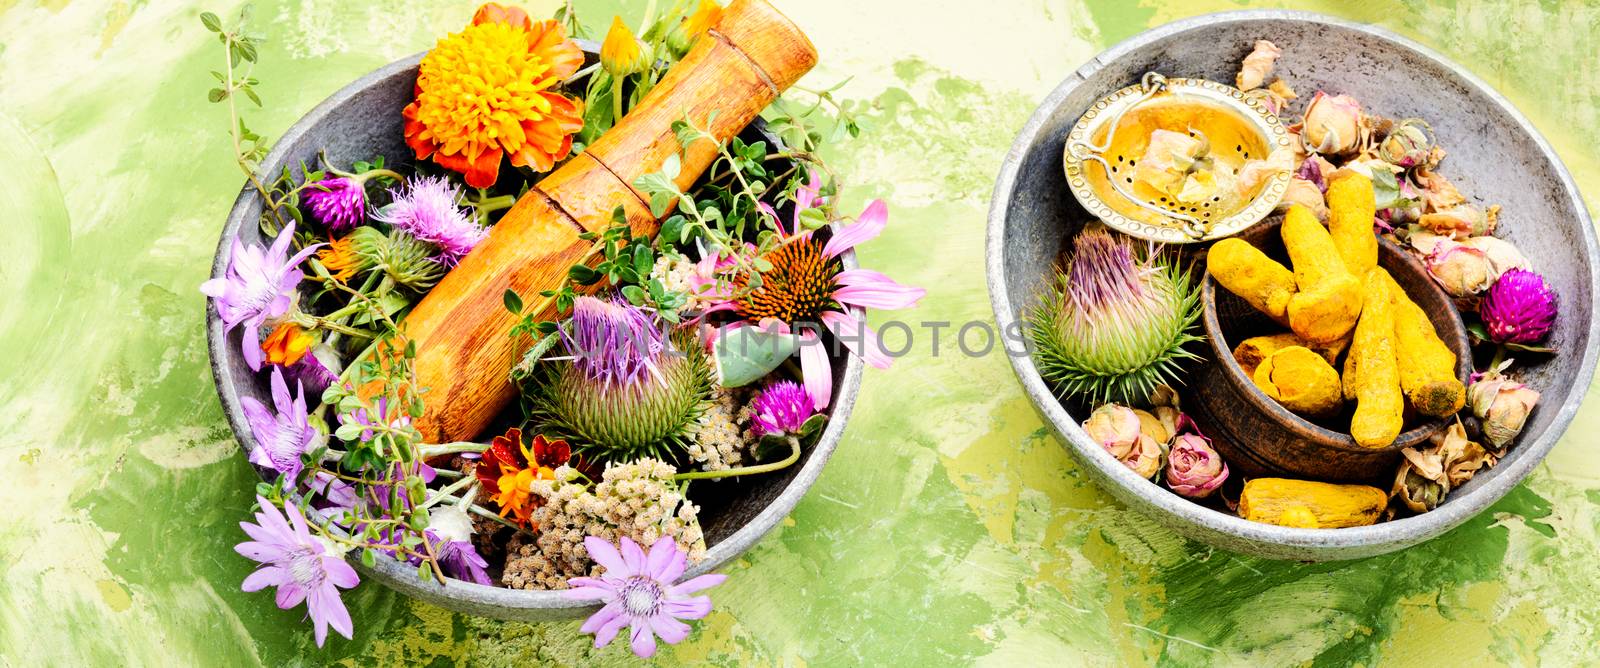 Healing herbs with mortar by LMykola